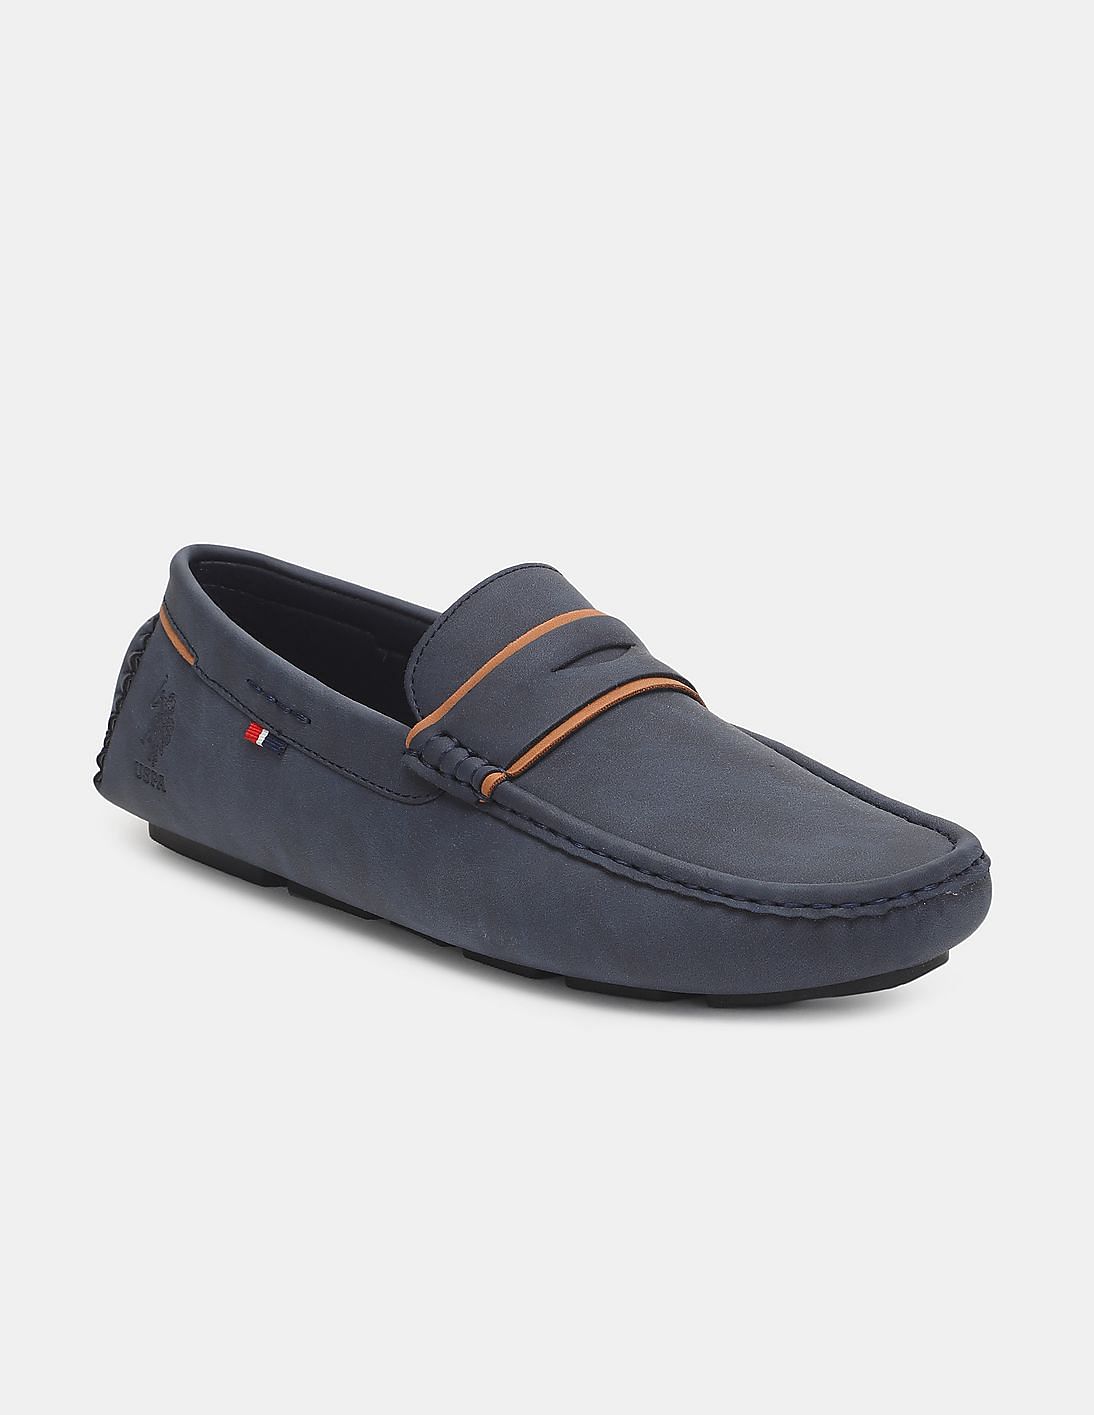 Buy U.S. Polo Assn. Men Round Toe Mirano 2.0 Penny Loafers - NNNOW.com